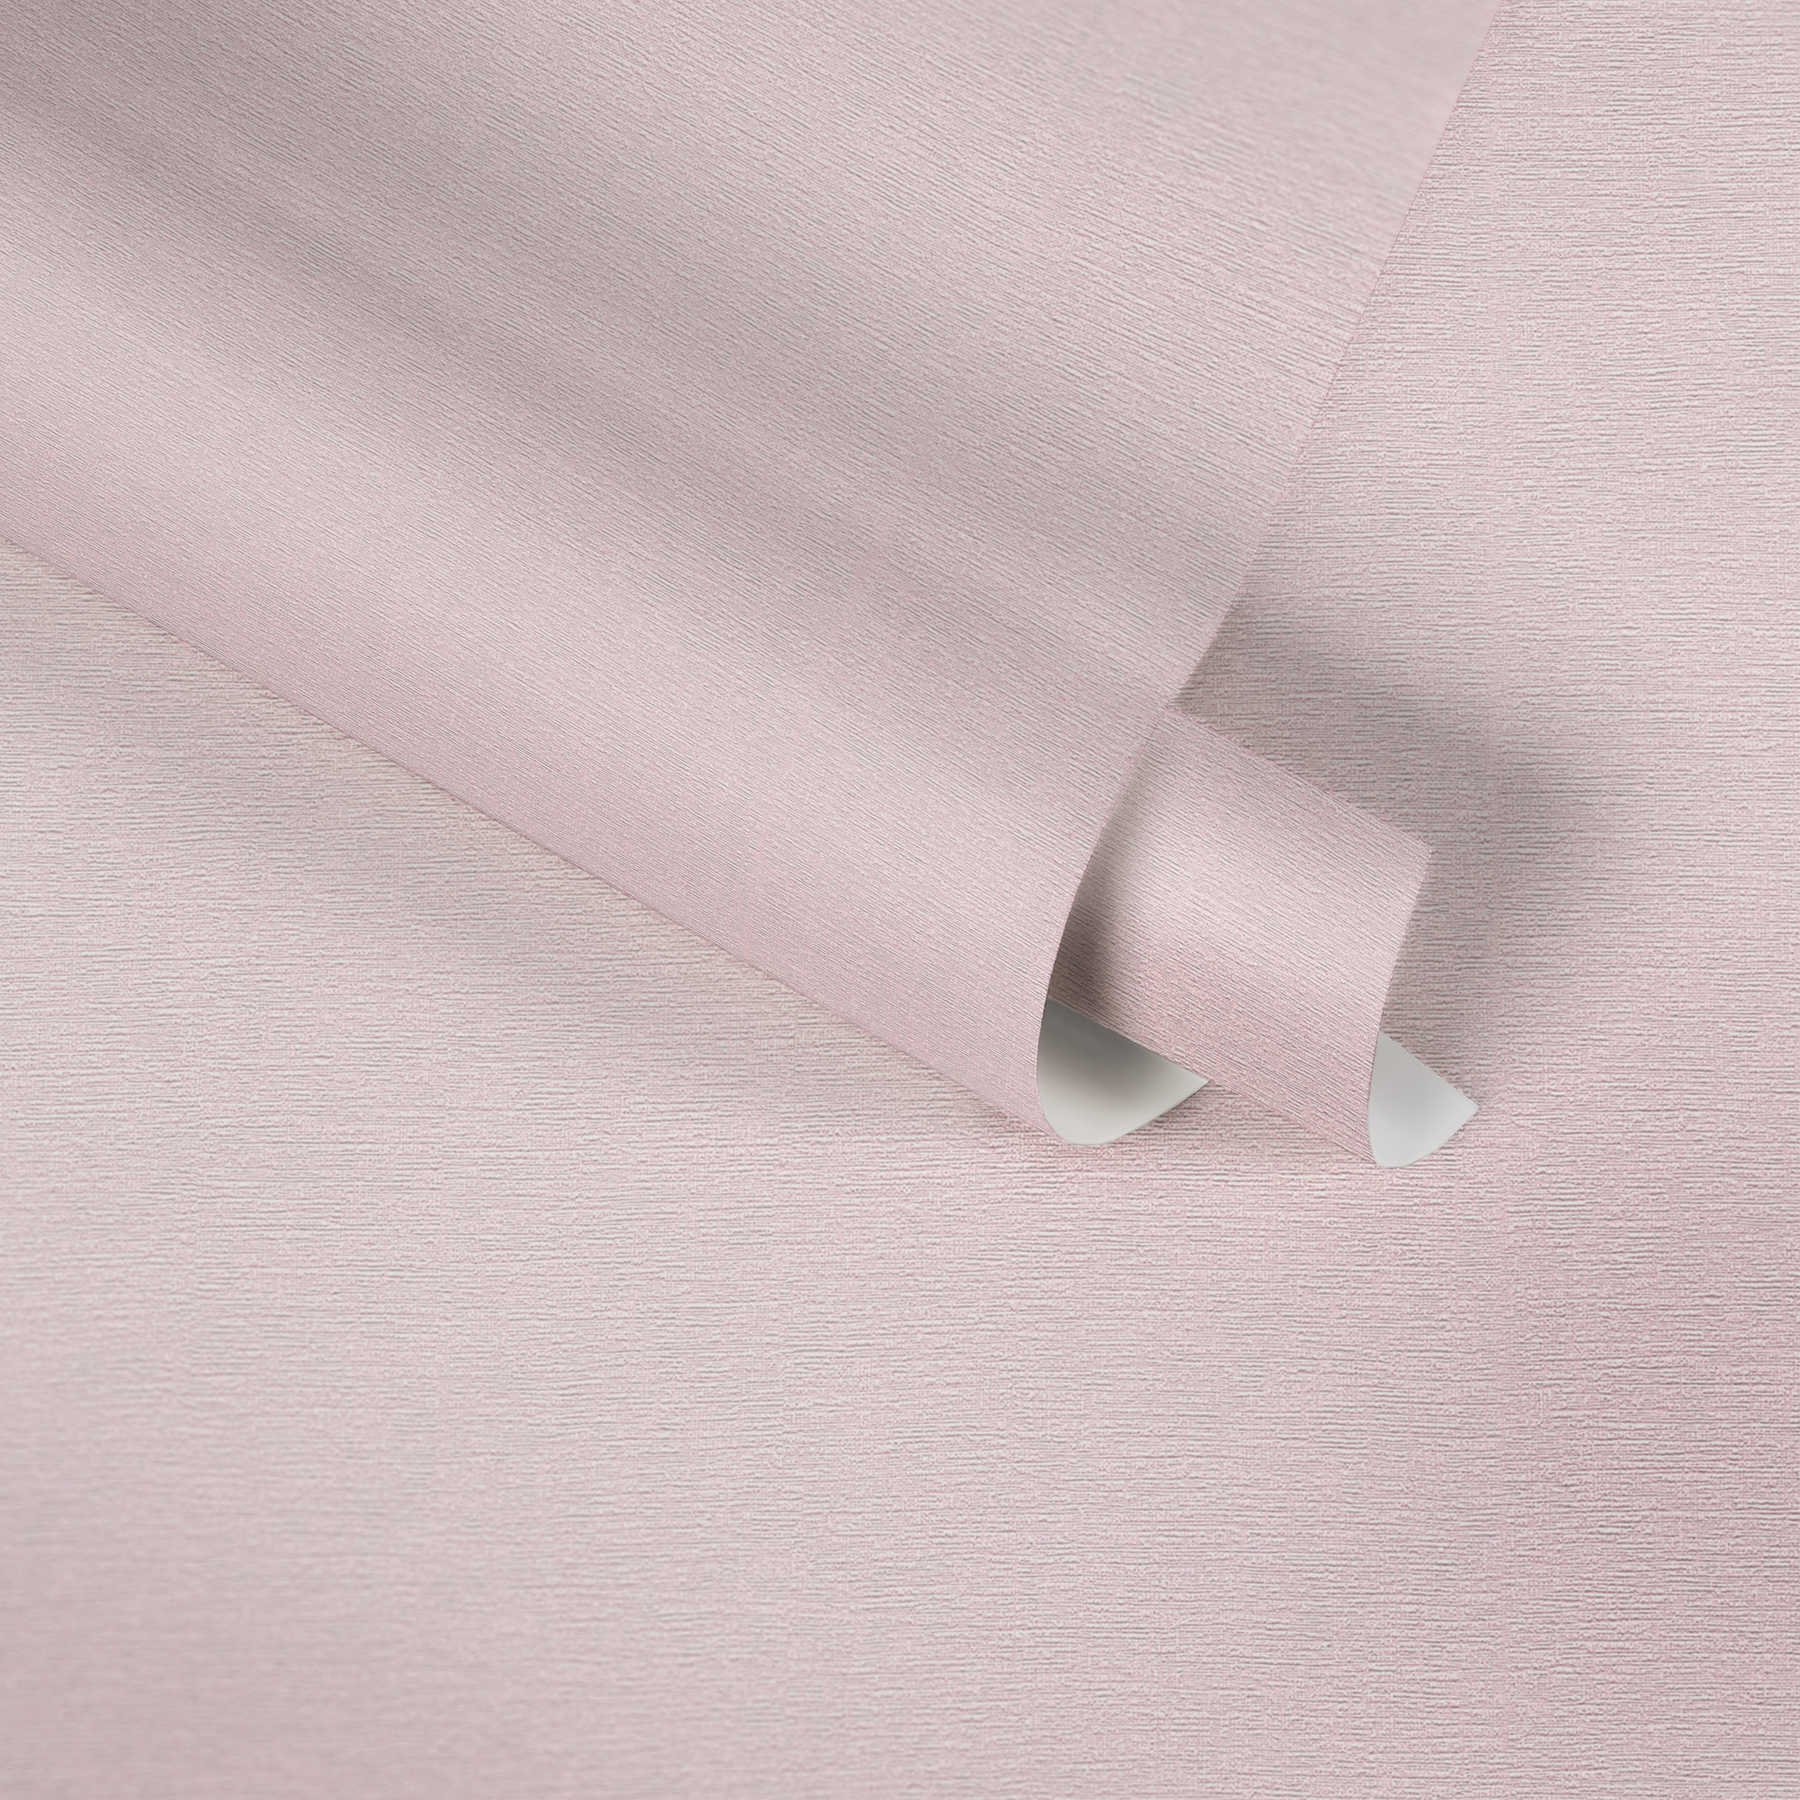             Non-woven wallpaper plain with textile look - pink
        